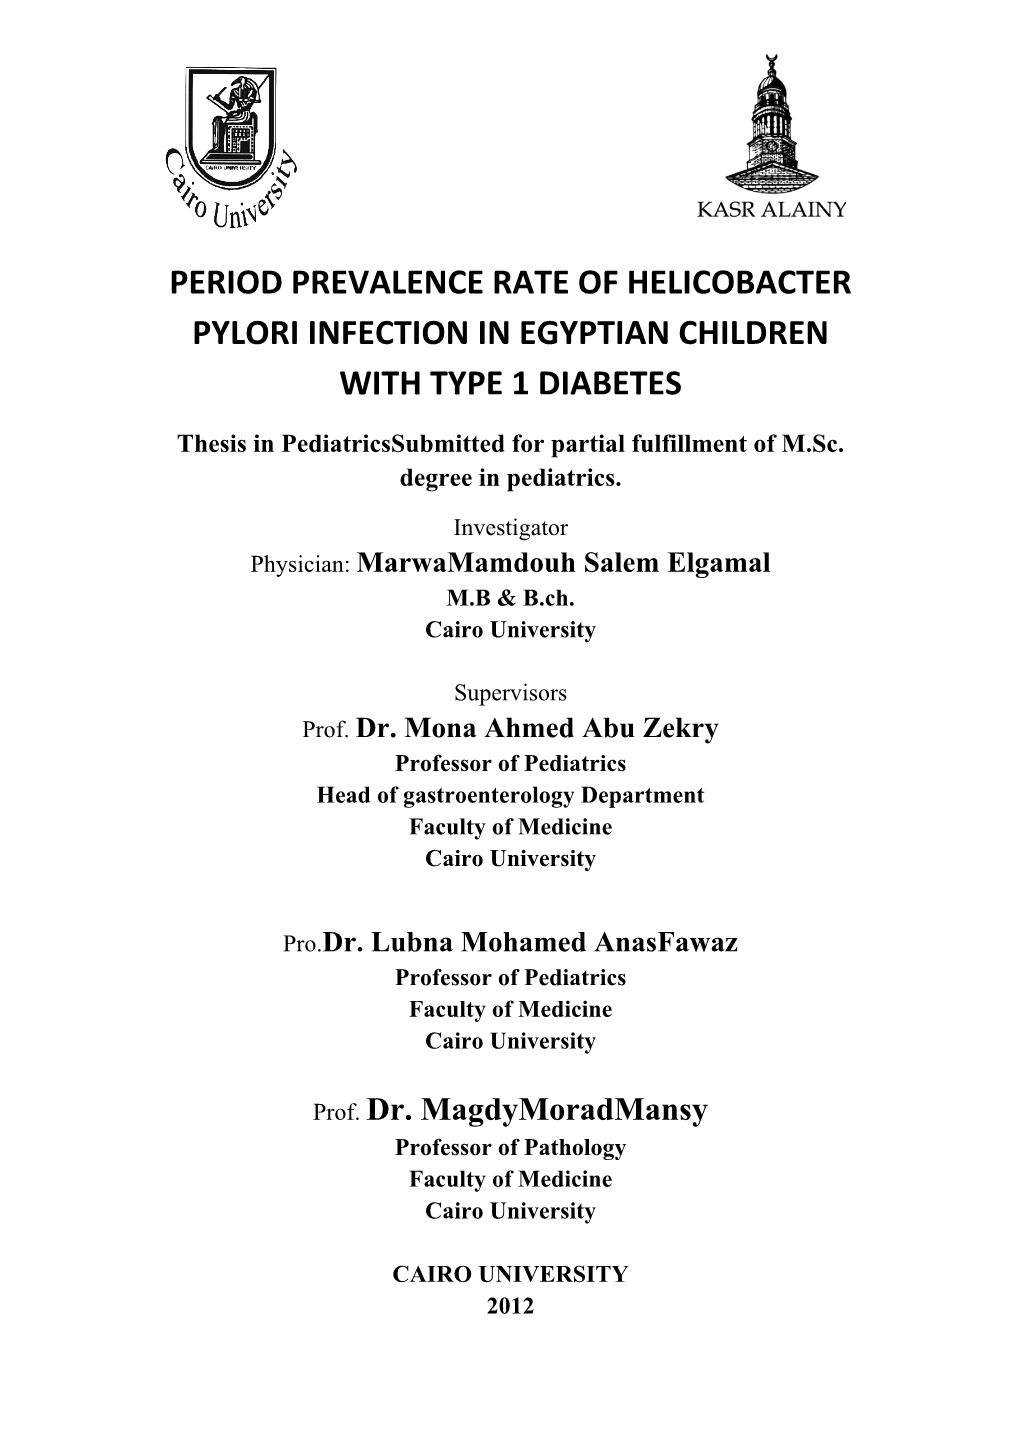 Period Prevalence Rate of Helicobacter Pylori Infection in Egyptian Children with Type 1 Diabetes